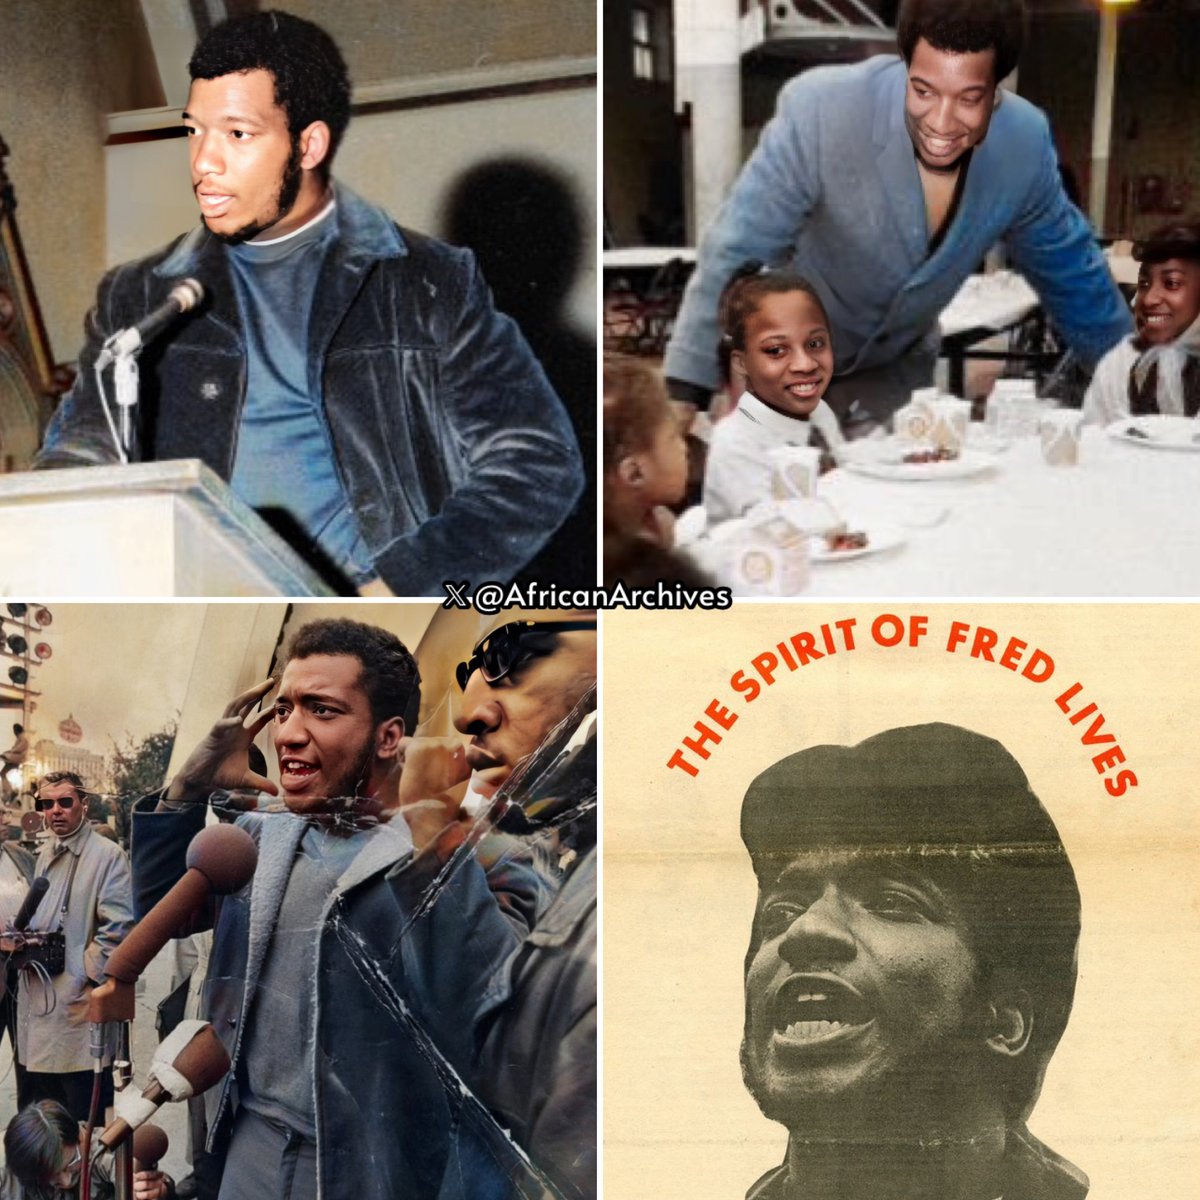 Happy birthday to activist and chairman of the Black Panther Party Fred Hampton. He was assassinated by Chicago police and the FBI at just 21 years old. William O'Neal, an FBI informant, infiltrated the Black Panthers and set up Fred Hampton for $300. A THREAD